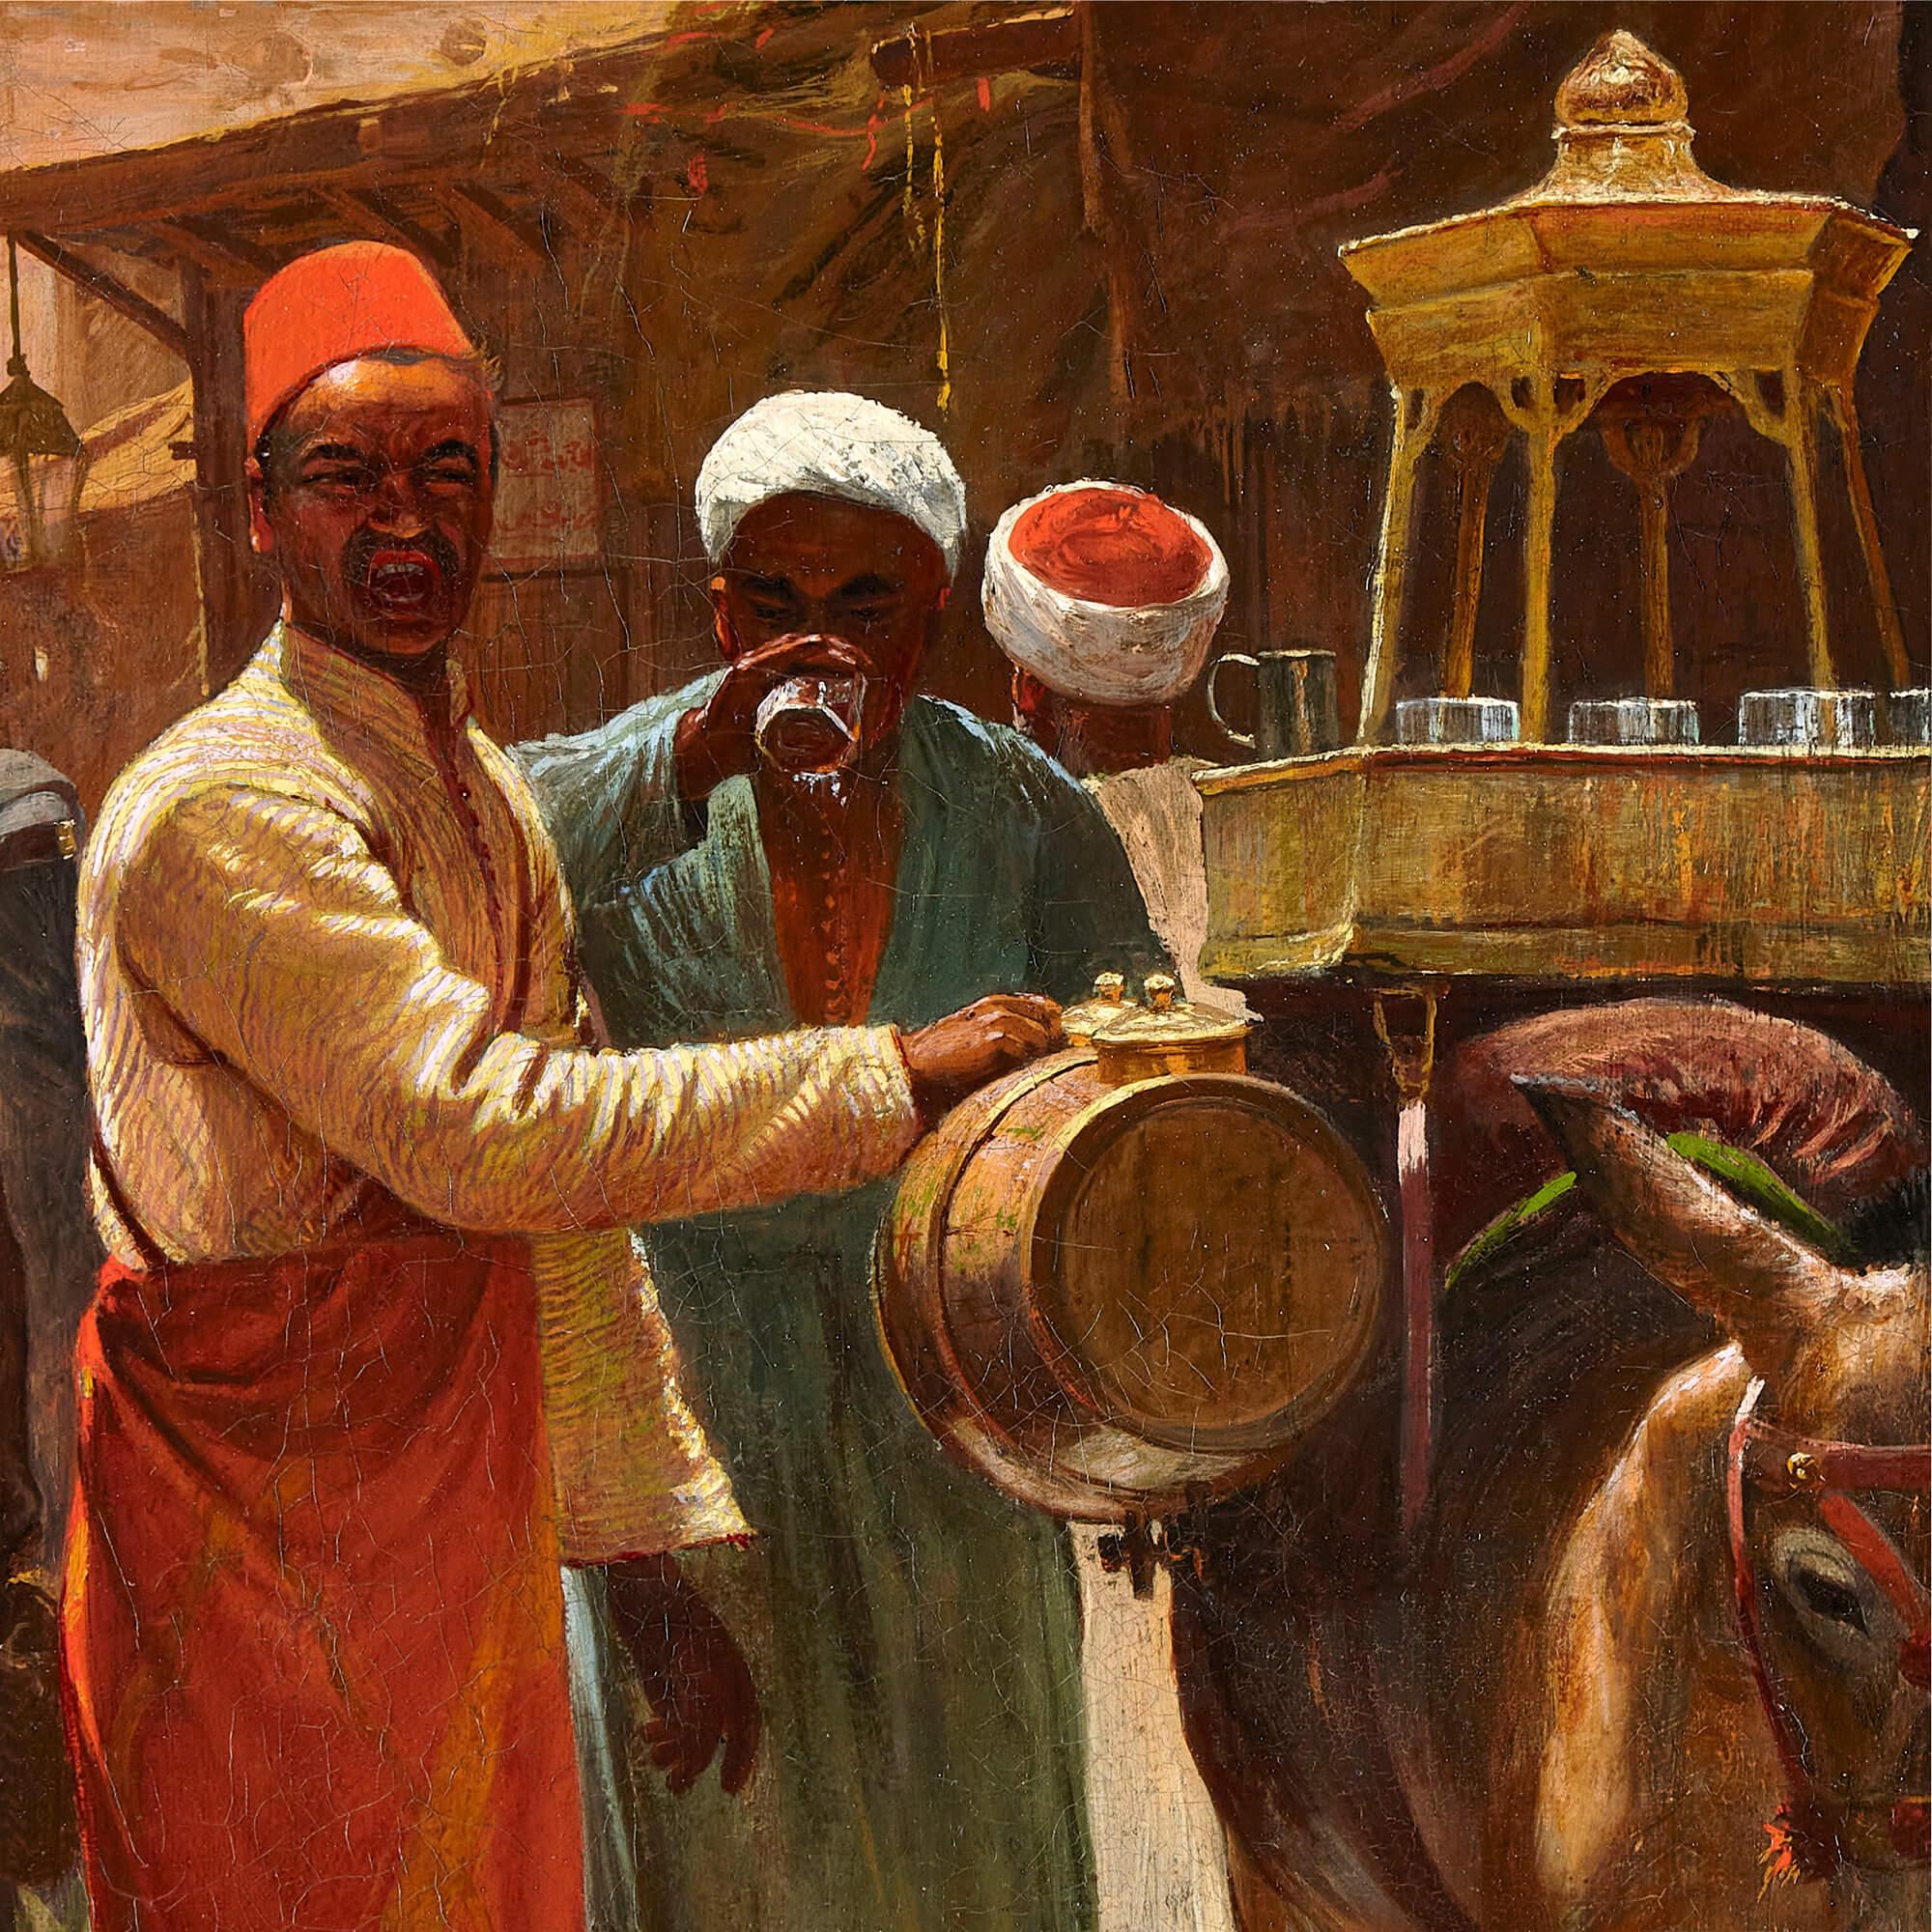 Orientalist oil painting of Cairo street and drinks salesman by Voill
Swiss, Late 19th Century 
Canvas: Height 65cm, width 47cm
Frame: Height 87cm, width 69cm, depth 7cm

Using deft strokes of oil on canvas, V. Voill immortalized the spirited